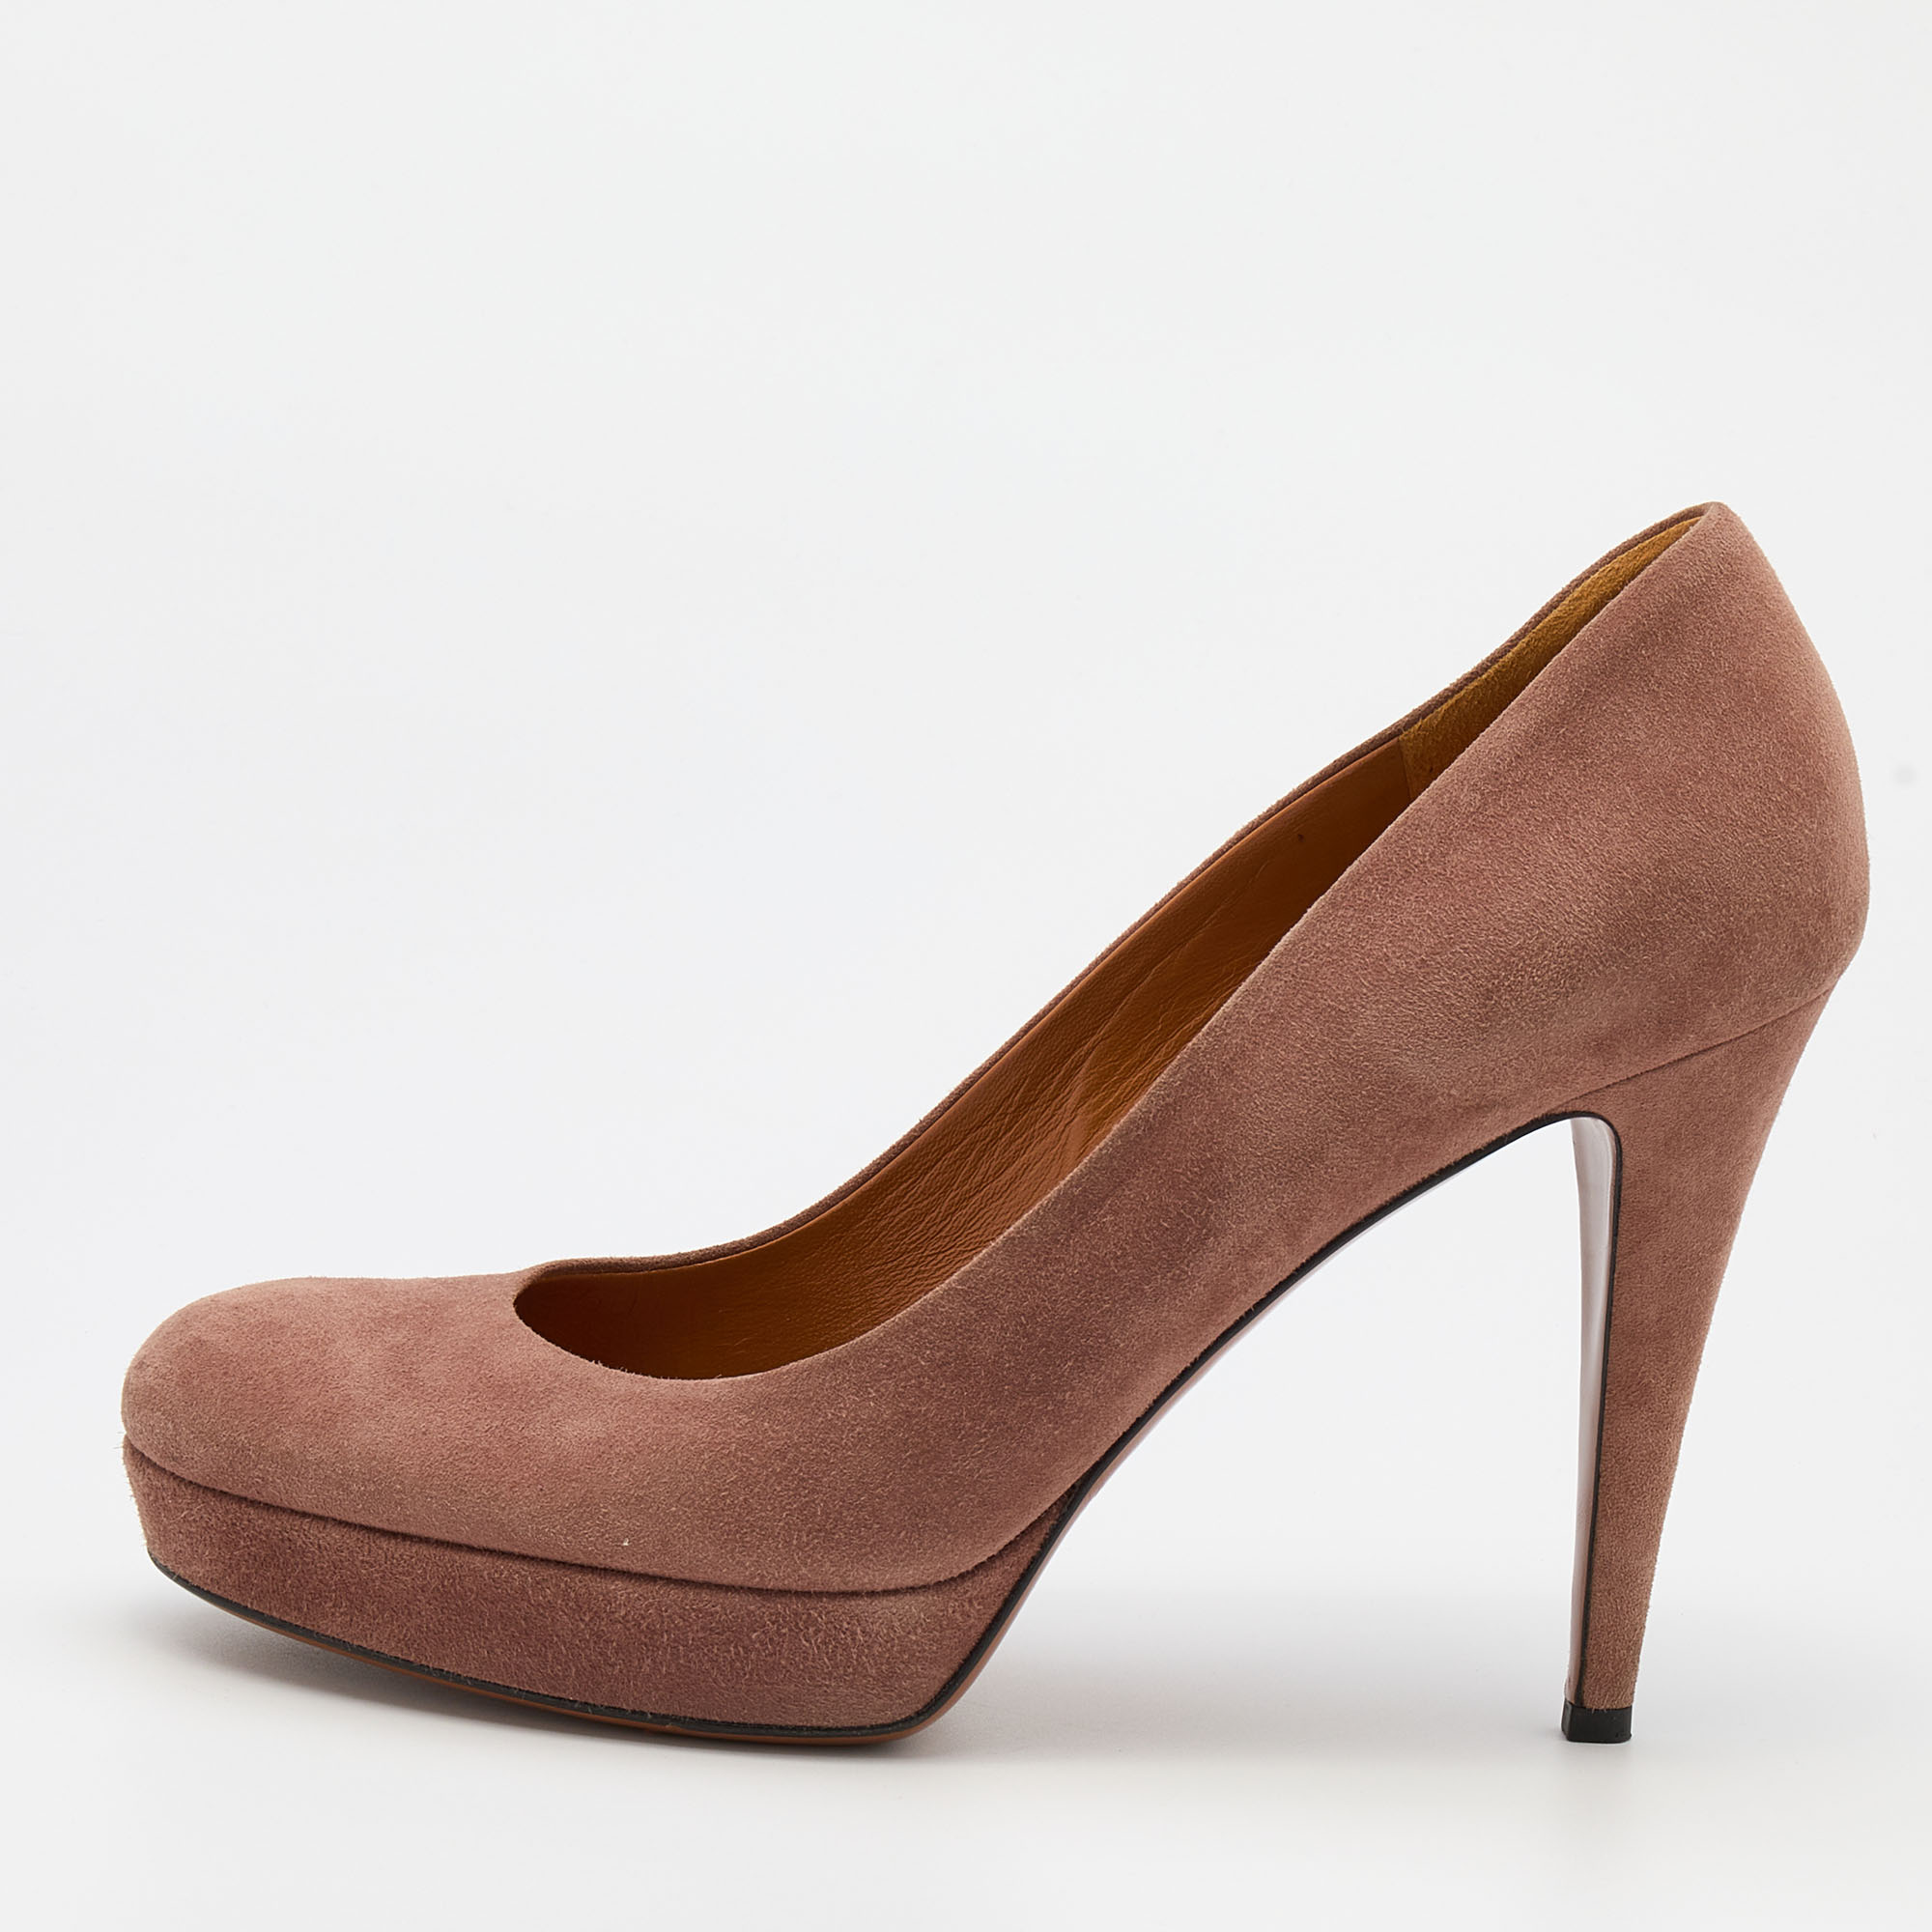 Gucci pink suede round toe pumps size 40